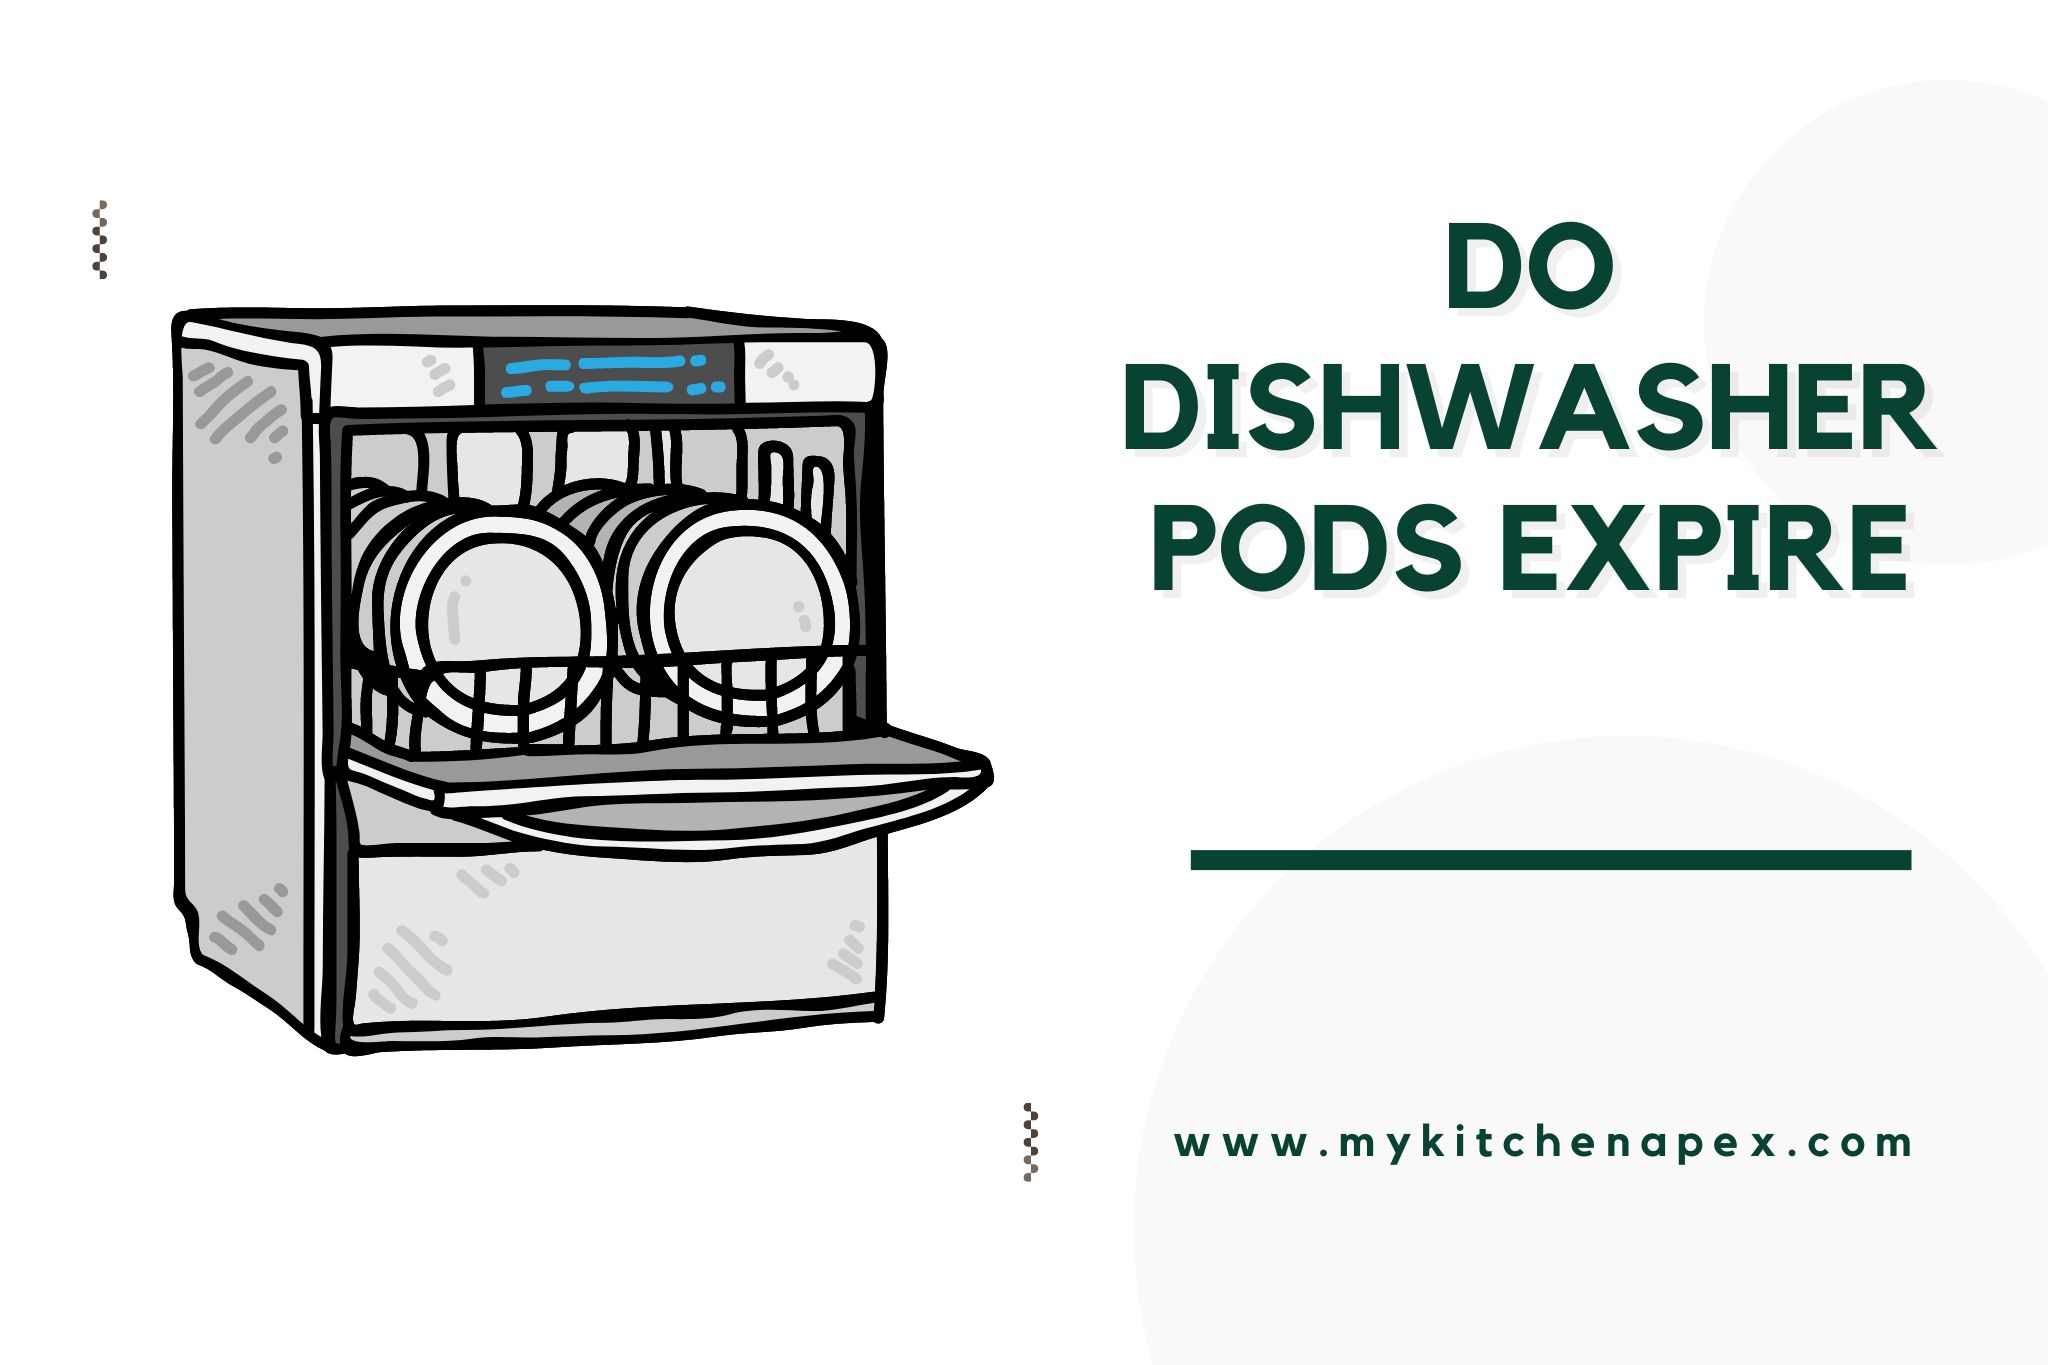 Do dishwasher pods expire? What to know & avoid